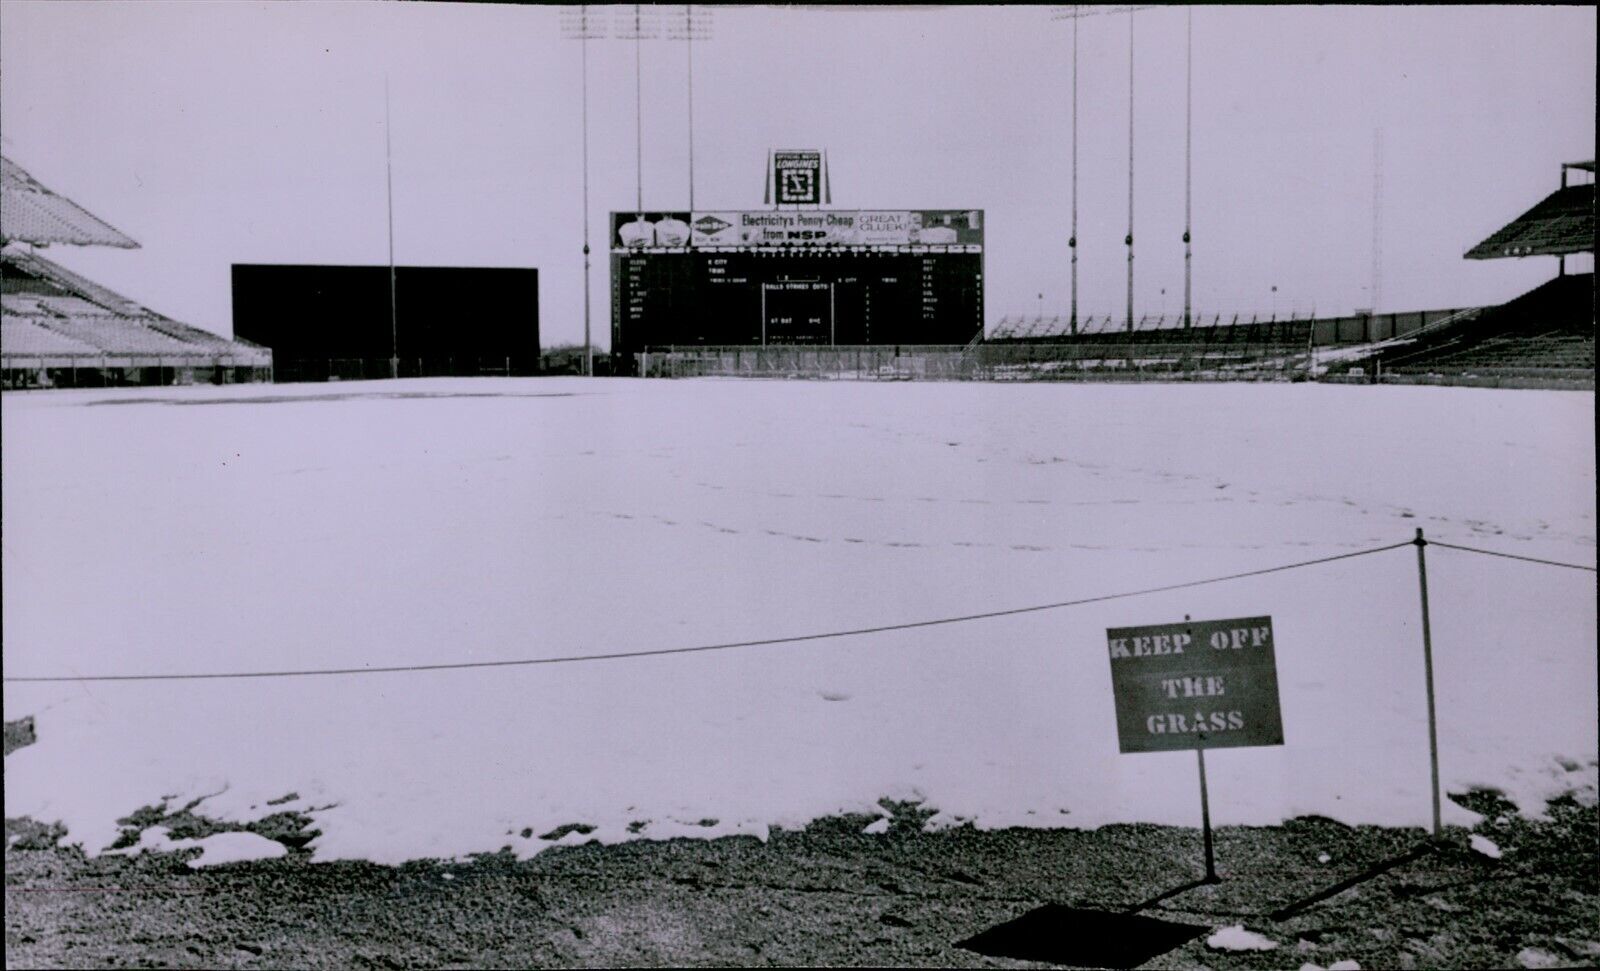 LG830 1966 Wire Photo DESERTED Met Stadium Keep Off the Grass Sign Snow Field